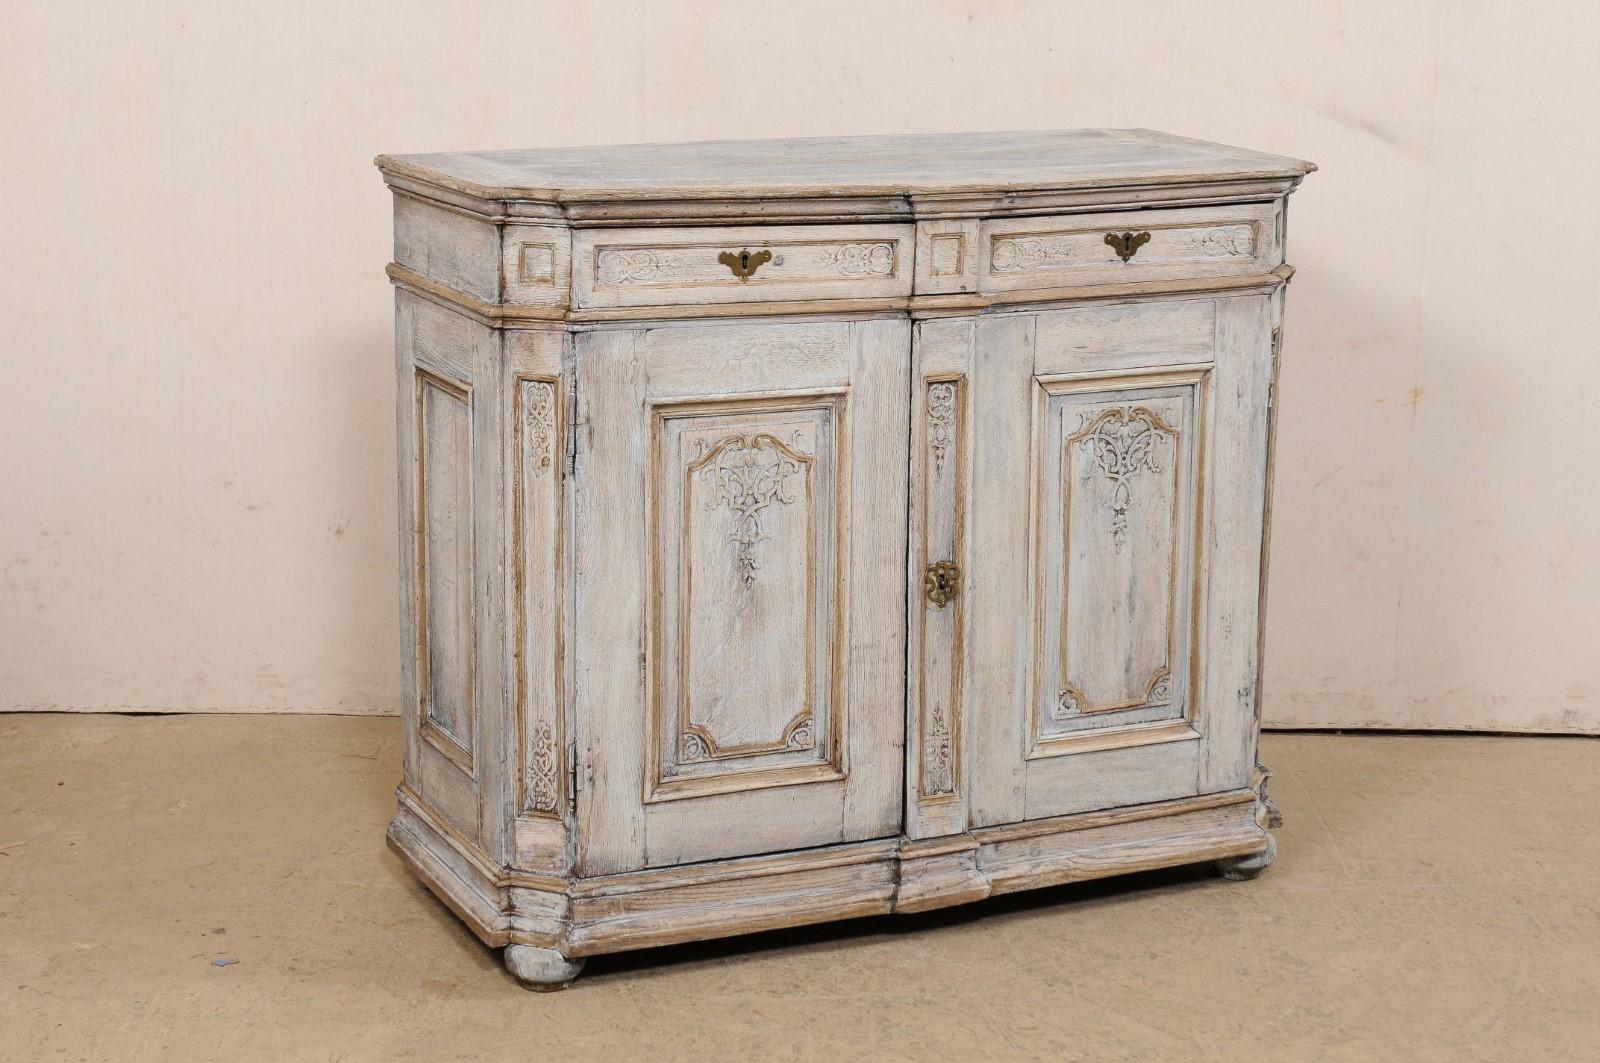 An English carved and painted wood buffet from the 18th century. This antique cabinet from England has been beautifully hand-carved with scroll and foliate designs embellishing the raised panels found along the drawer and door fronts, as well as